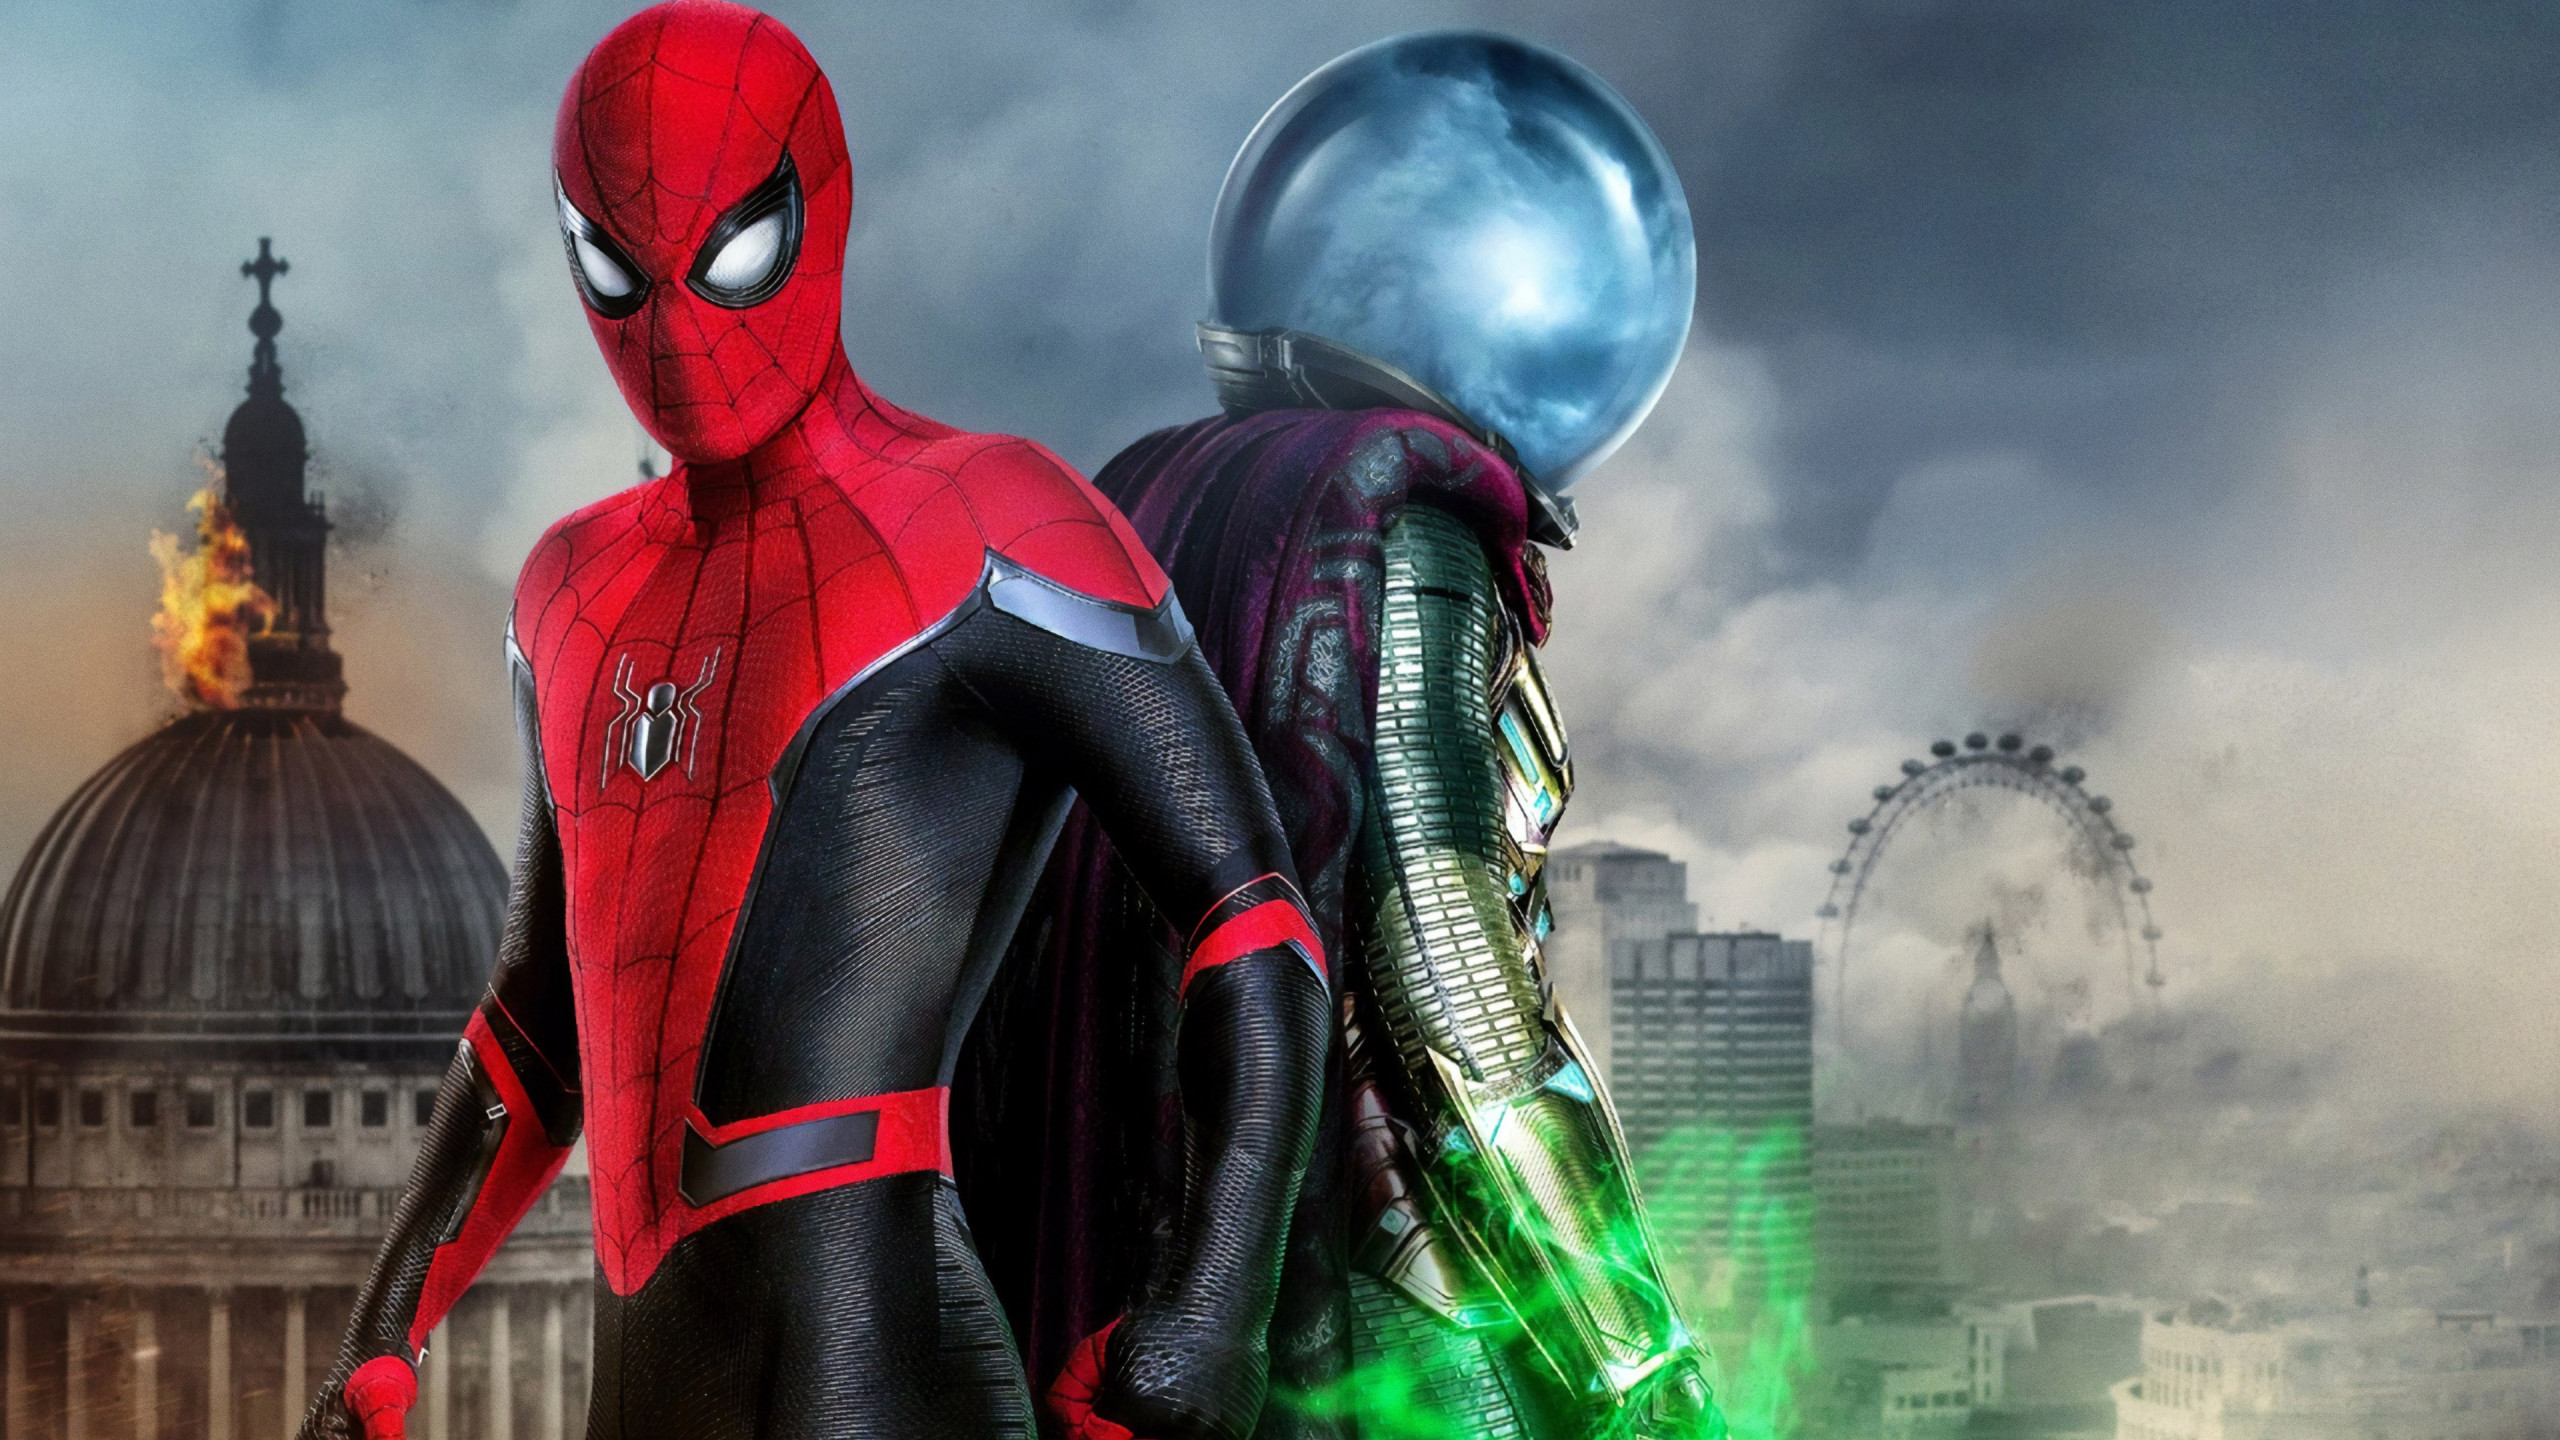 Spider Man and Mysterio wallpaper 2560x1440